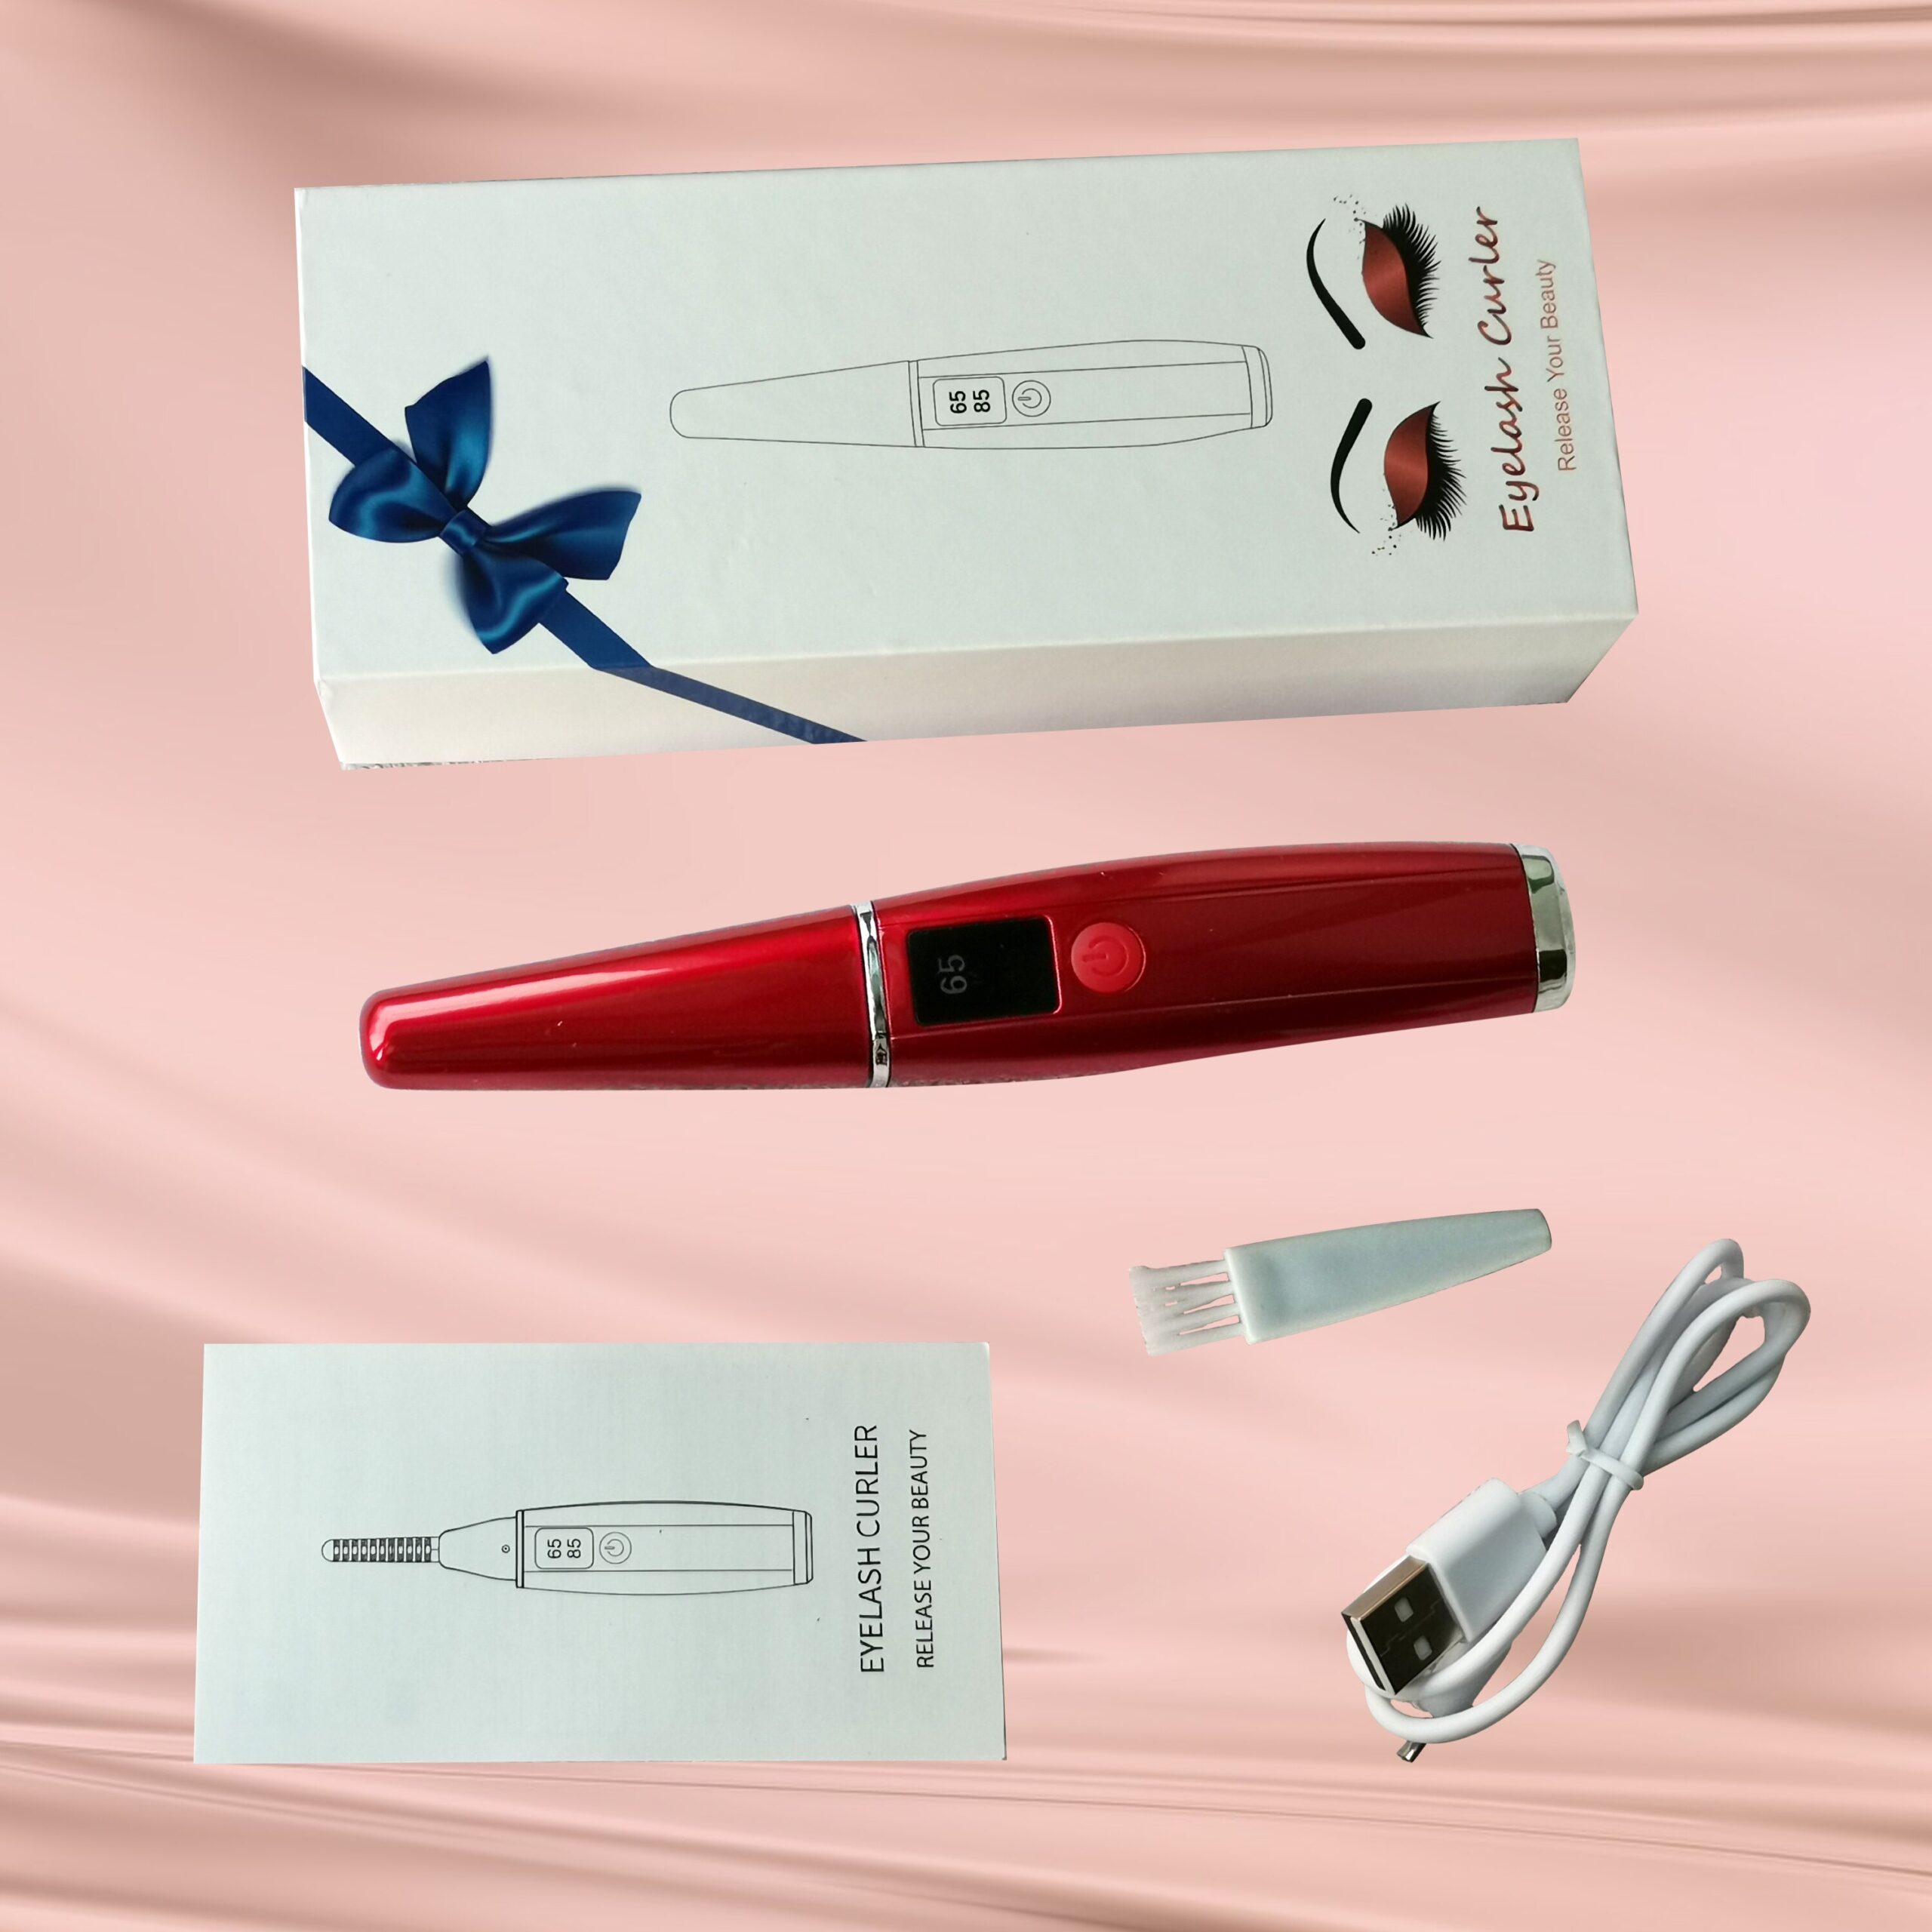 New Smart Temperature Control Electric Eyelash Curler, Safety Heated with LCD Display, USB Charge Portable Long Lasting